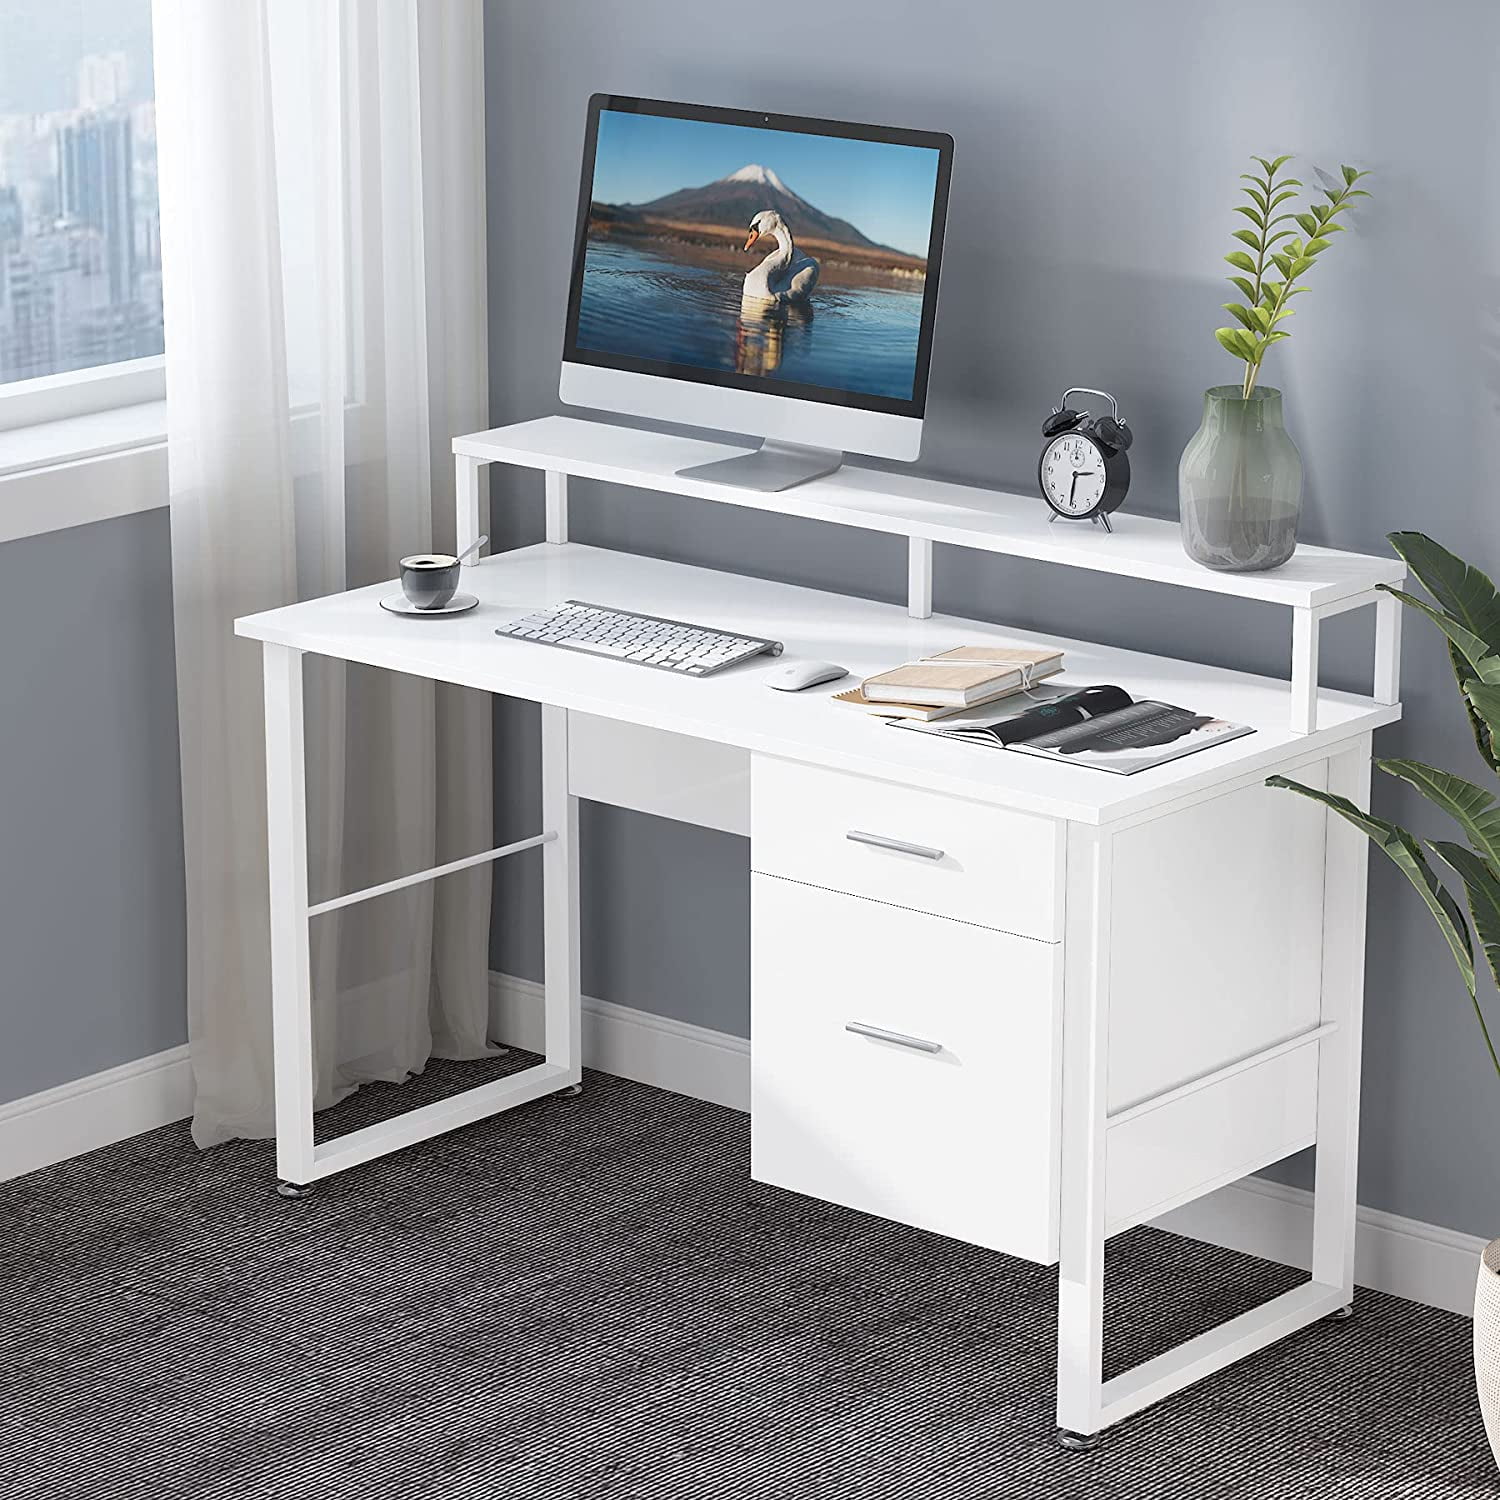 Details about   Wood Computer Workstation Writing Desk w/ 4 Drawers Home Office Furniture White 